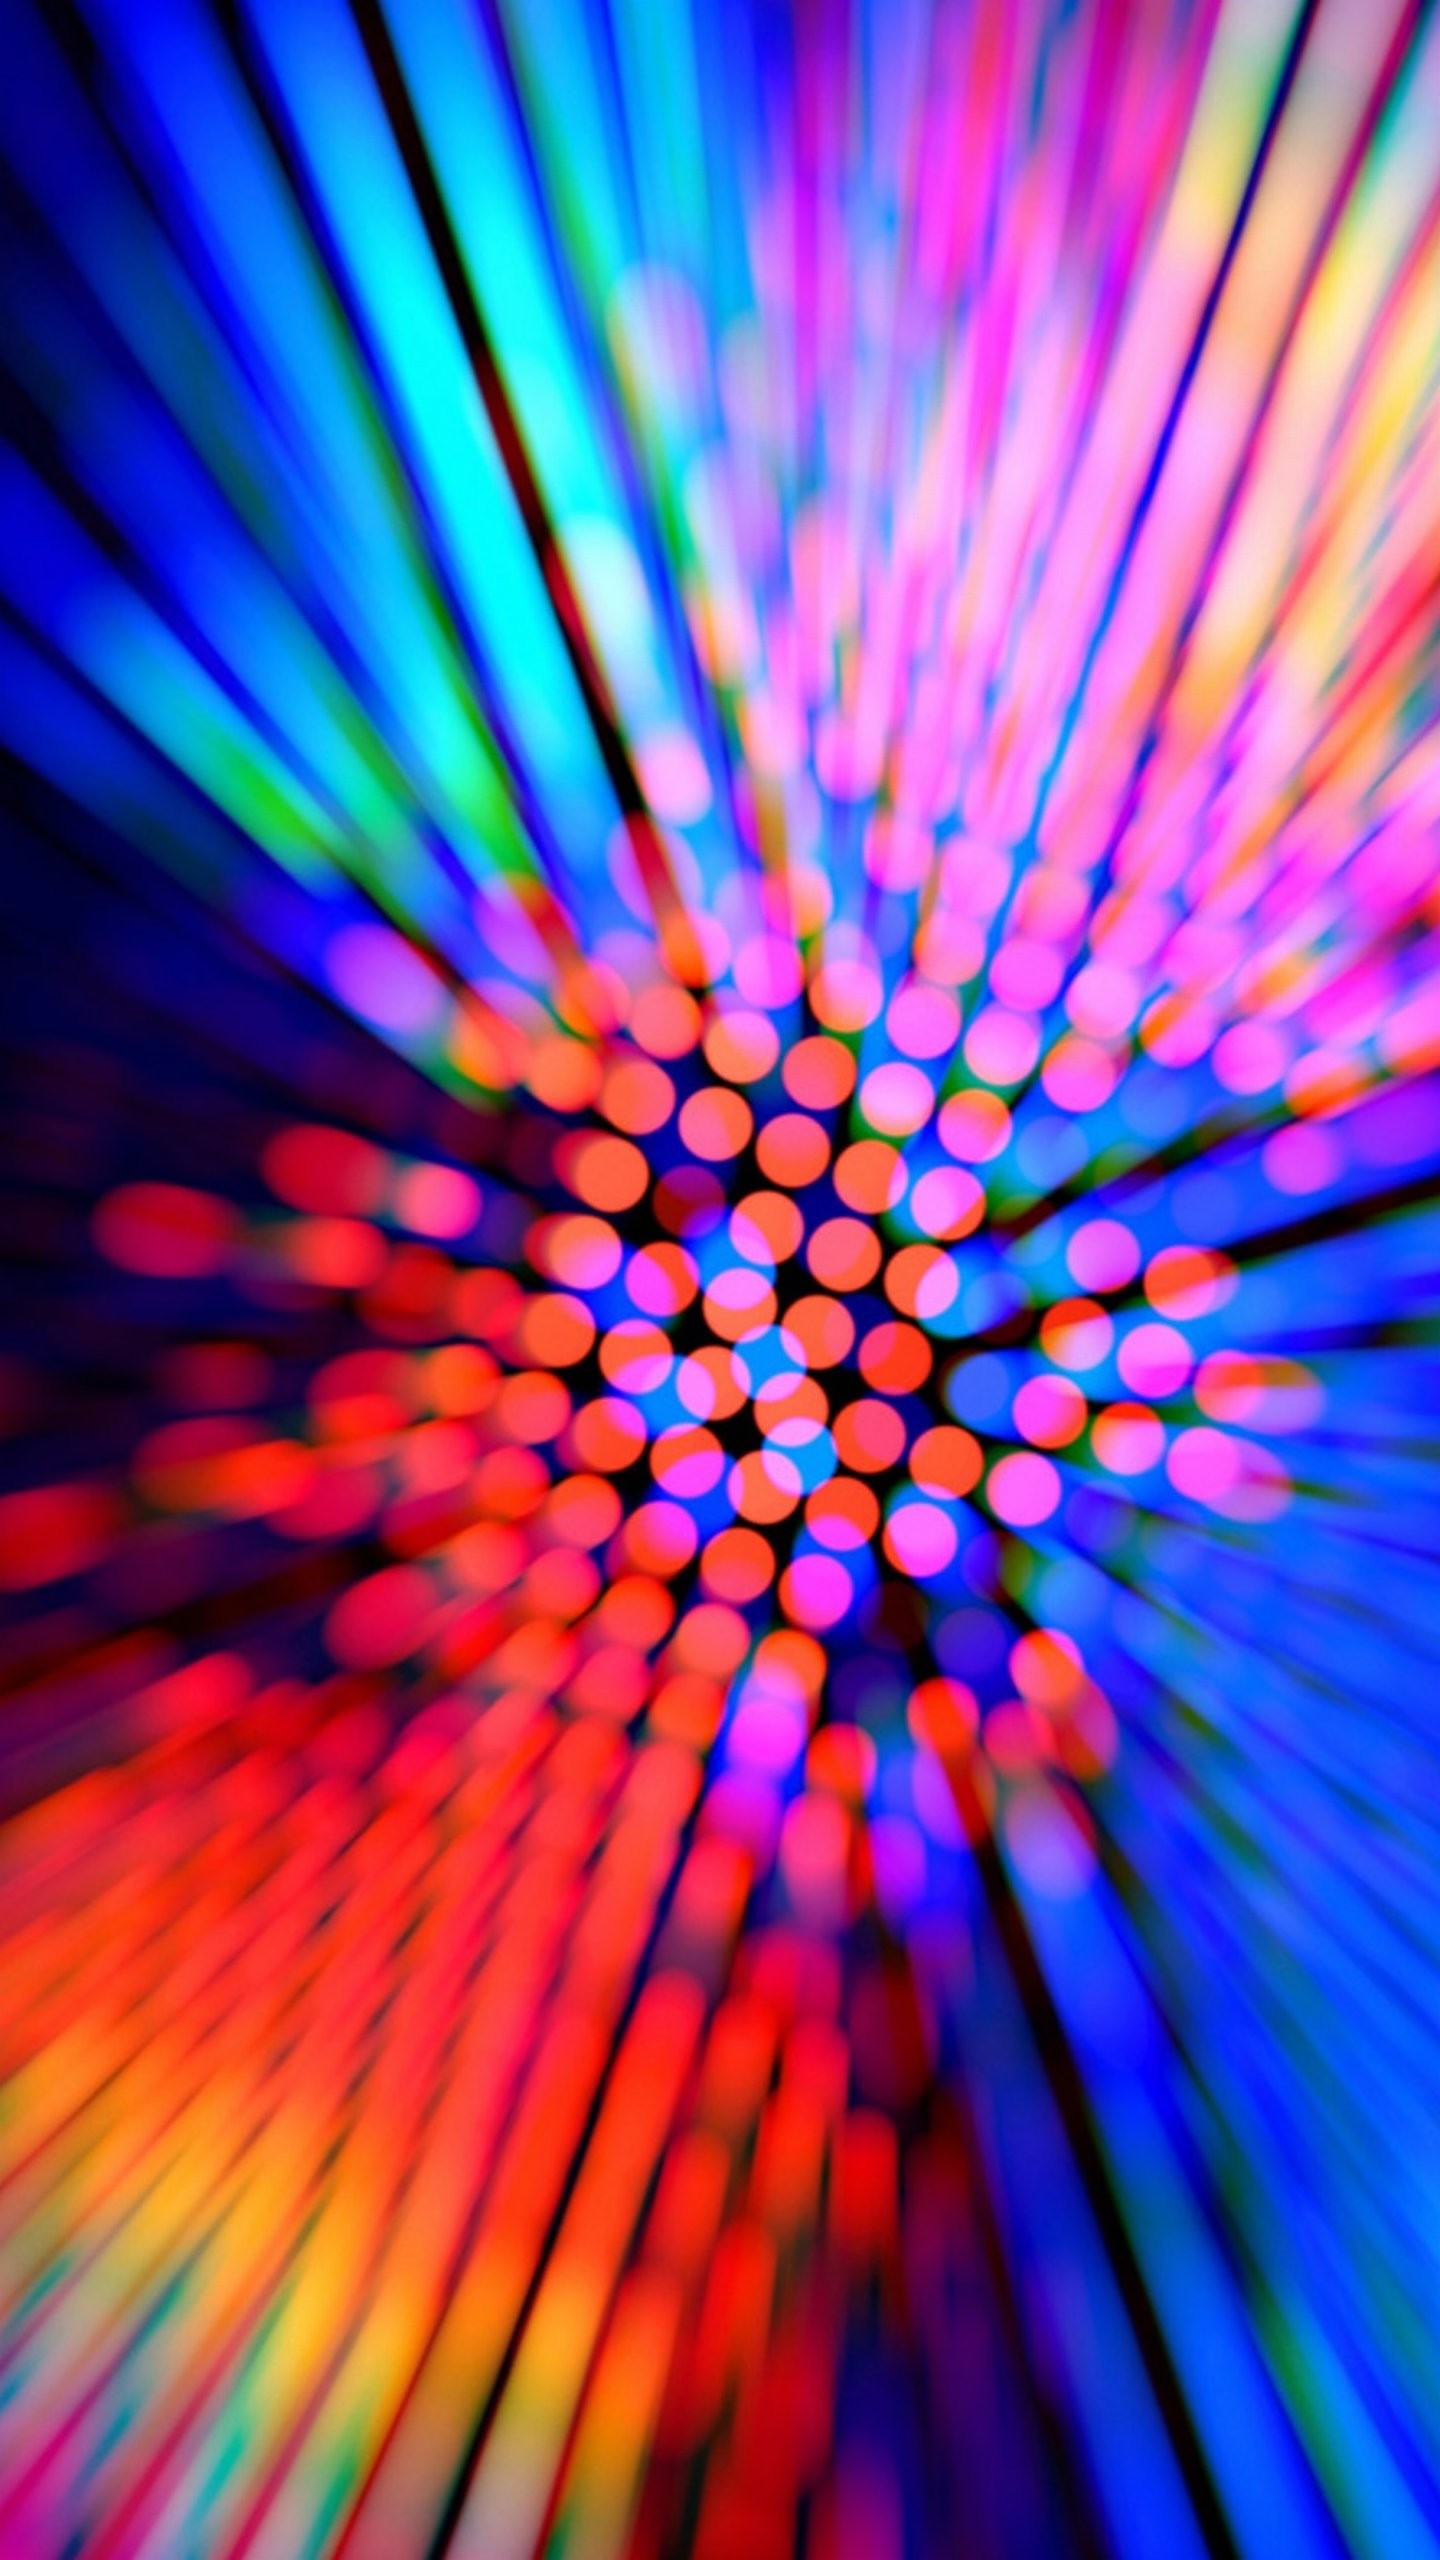 Wallpaper lg g4 speed colors abstract 1440 2560 qhd